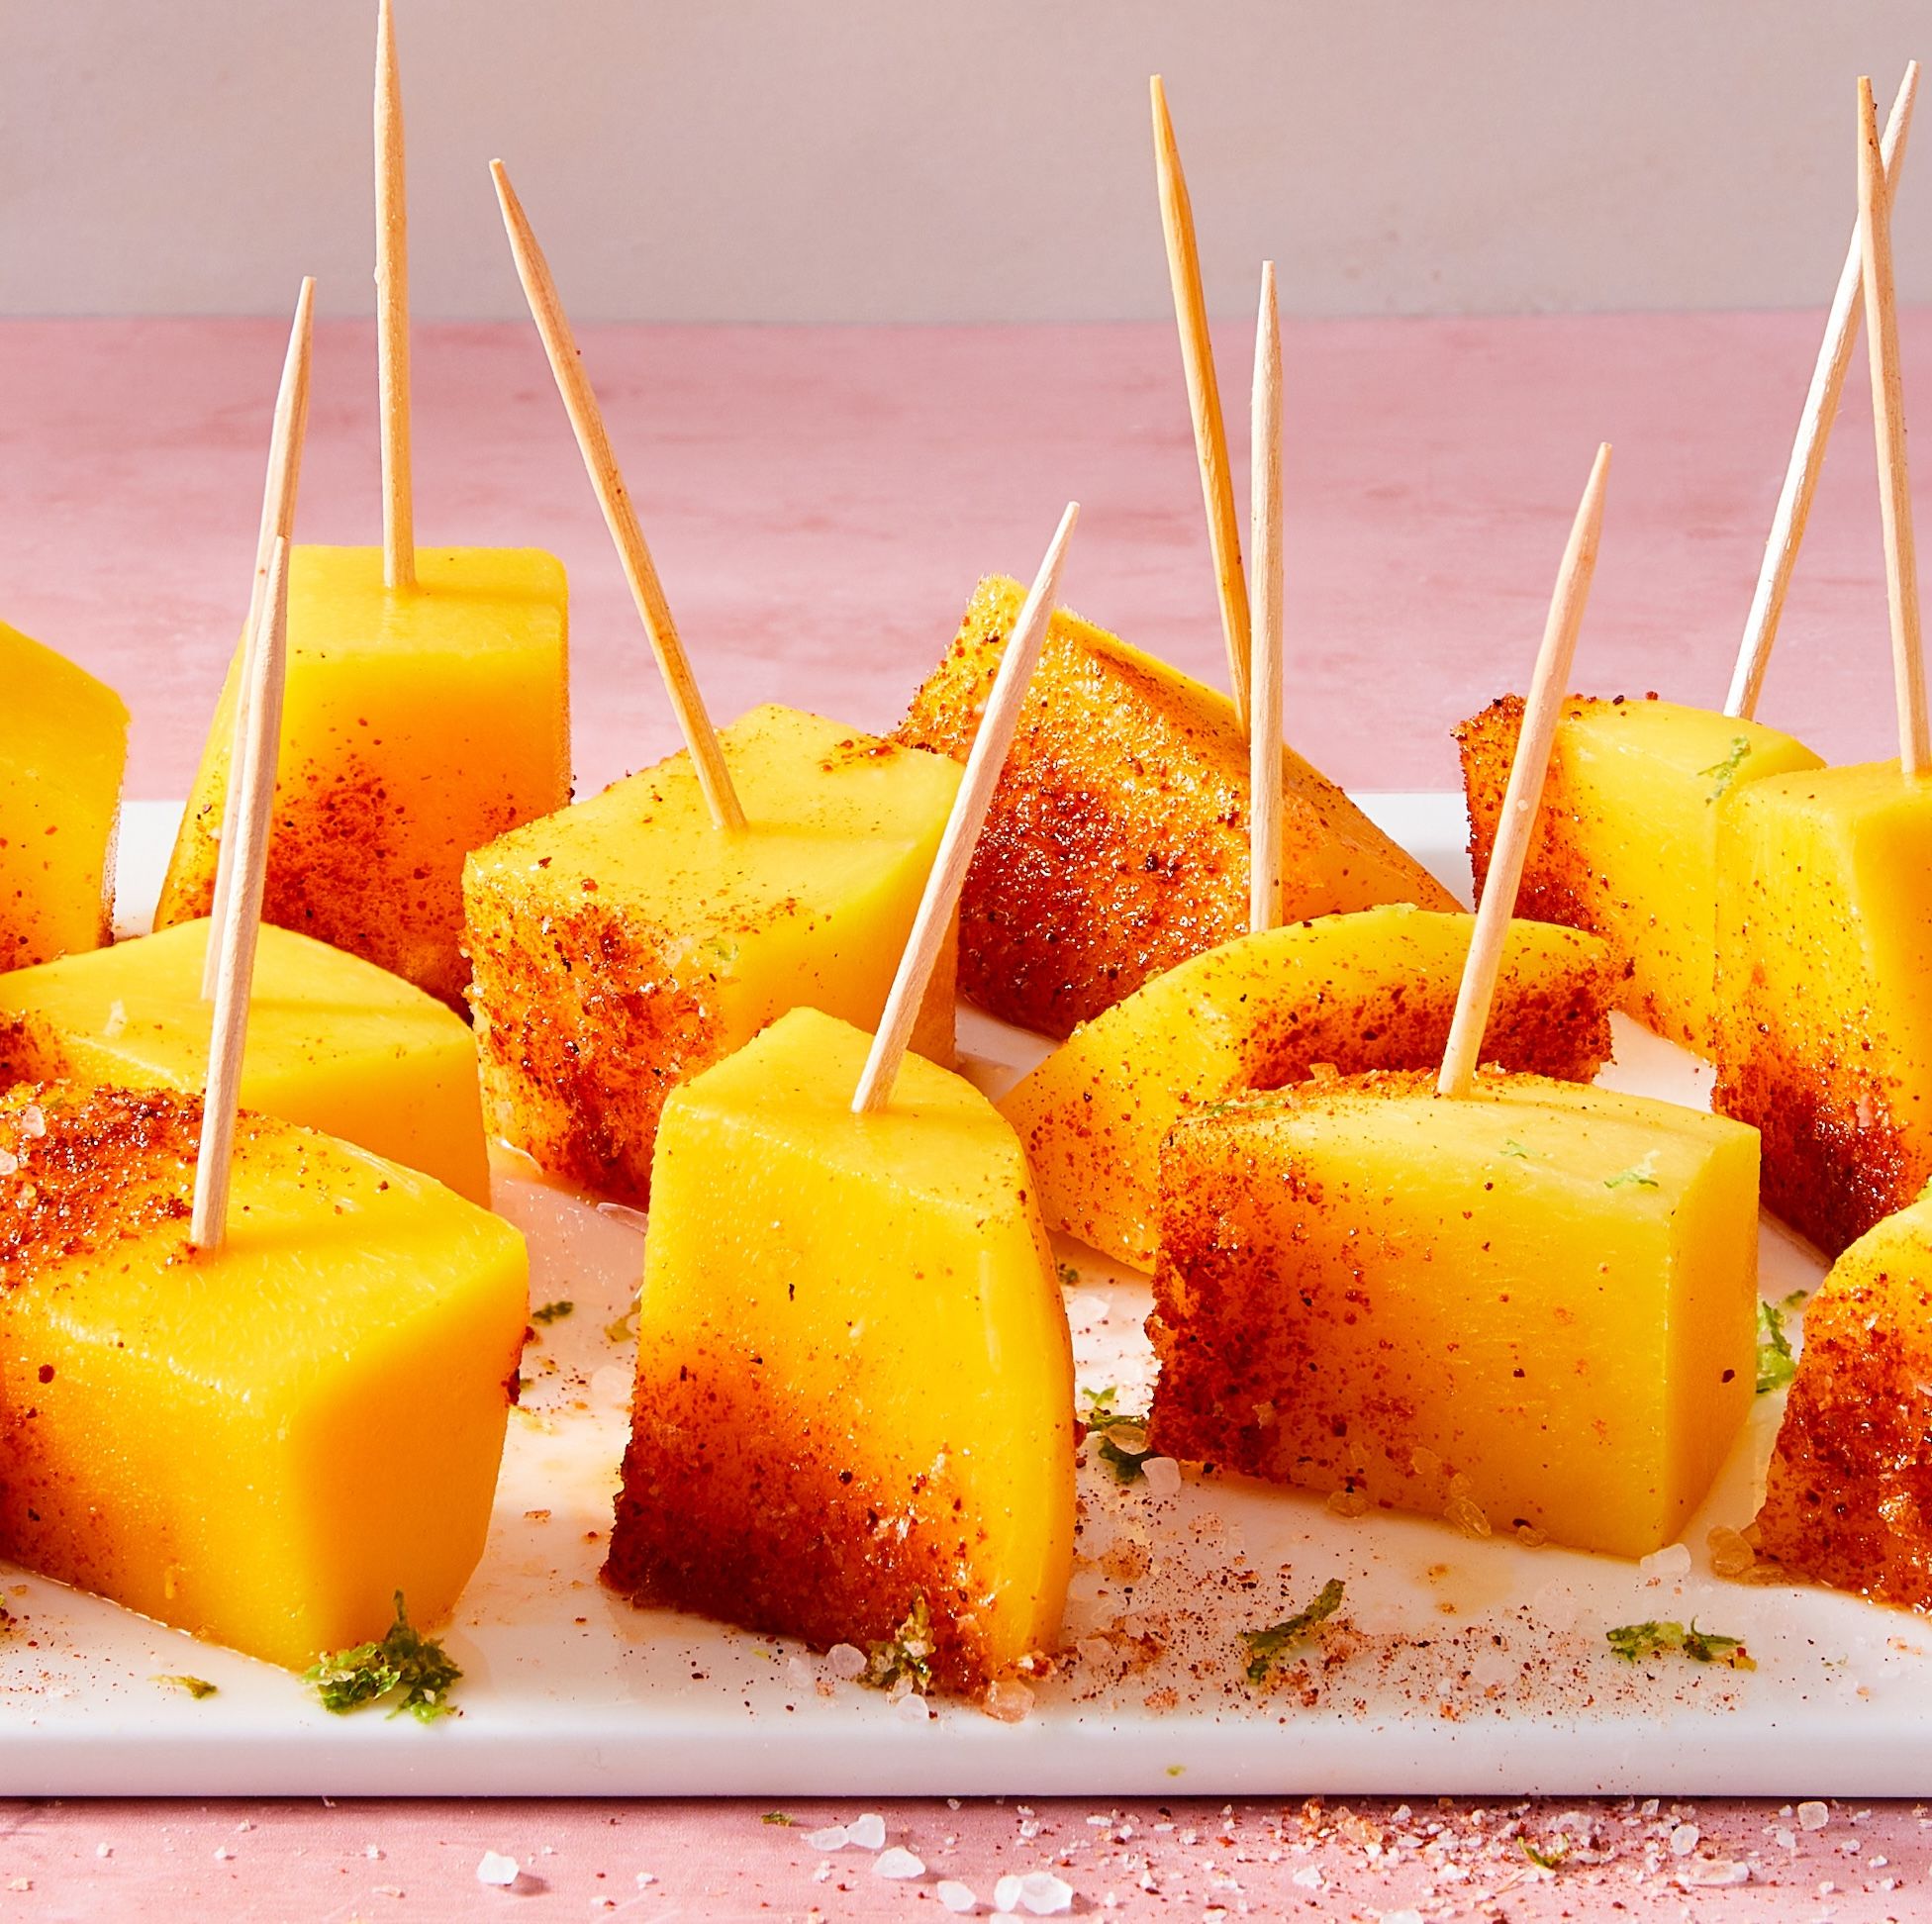 We've Soaked These Mango Bites In Tequila & Lime Juice For The Ultimate Party Treat